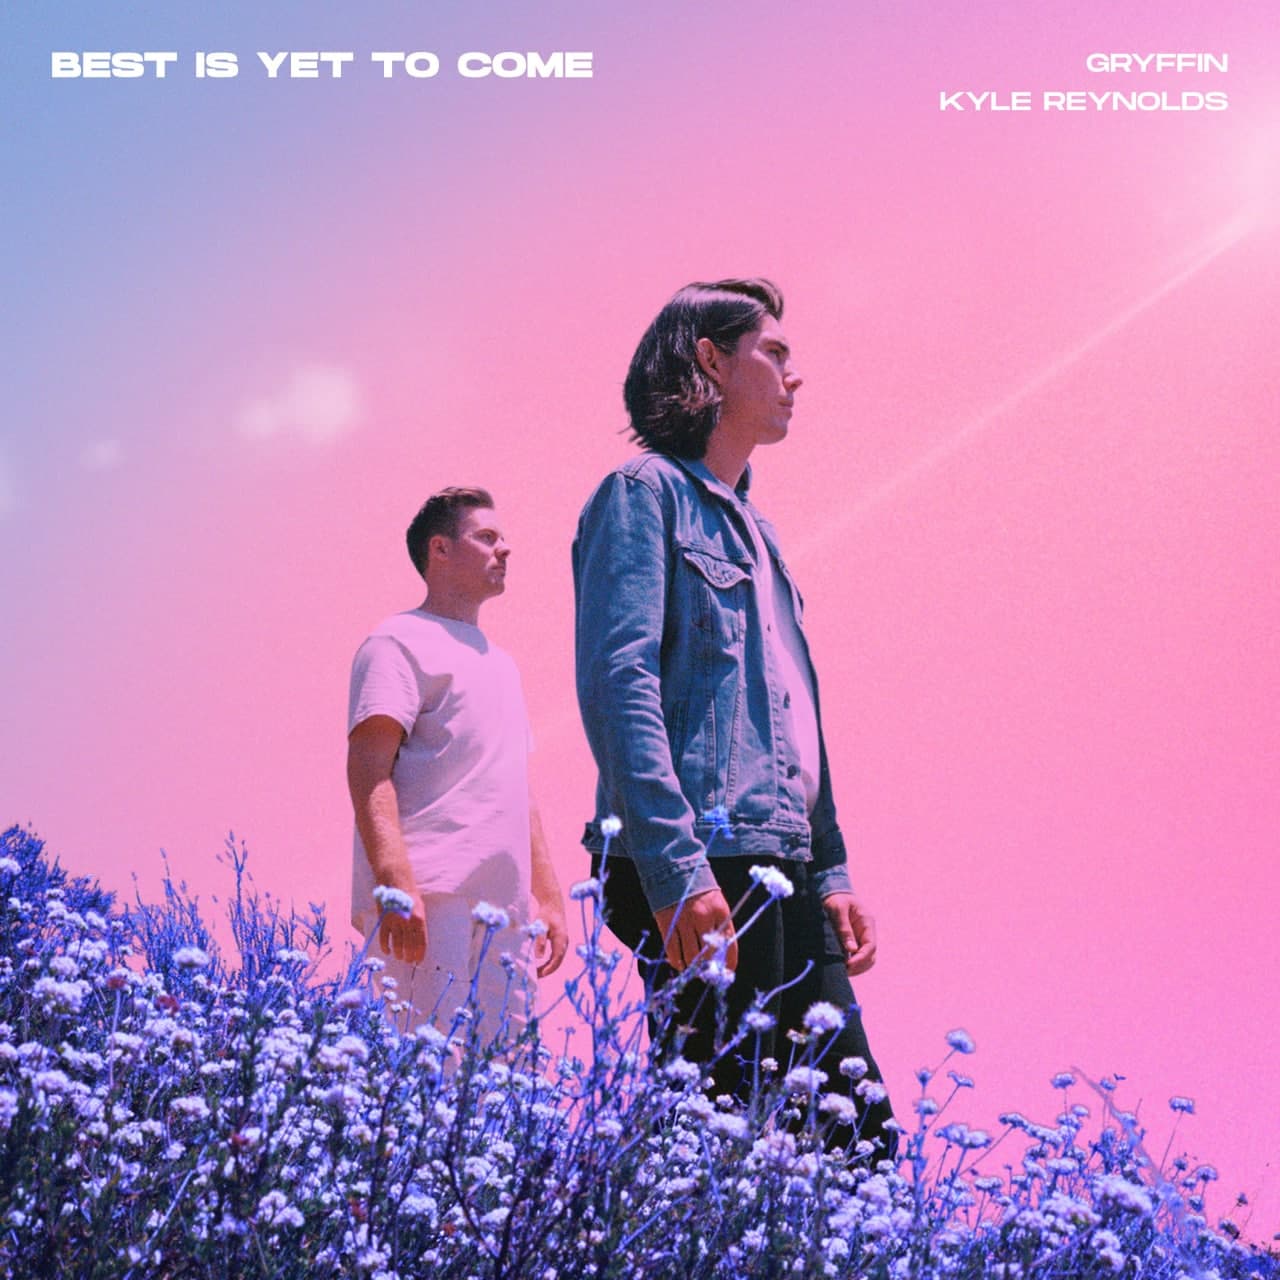 Gryffin & Kyle Reynolds - Best Is Yet To Come (Original Mix)